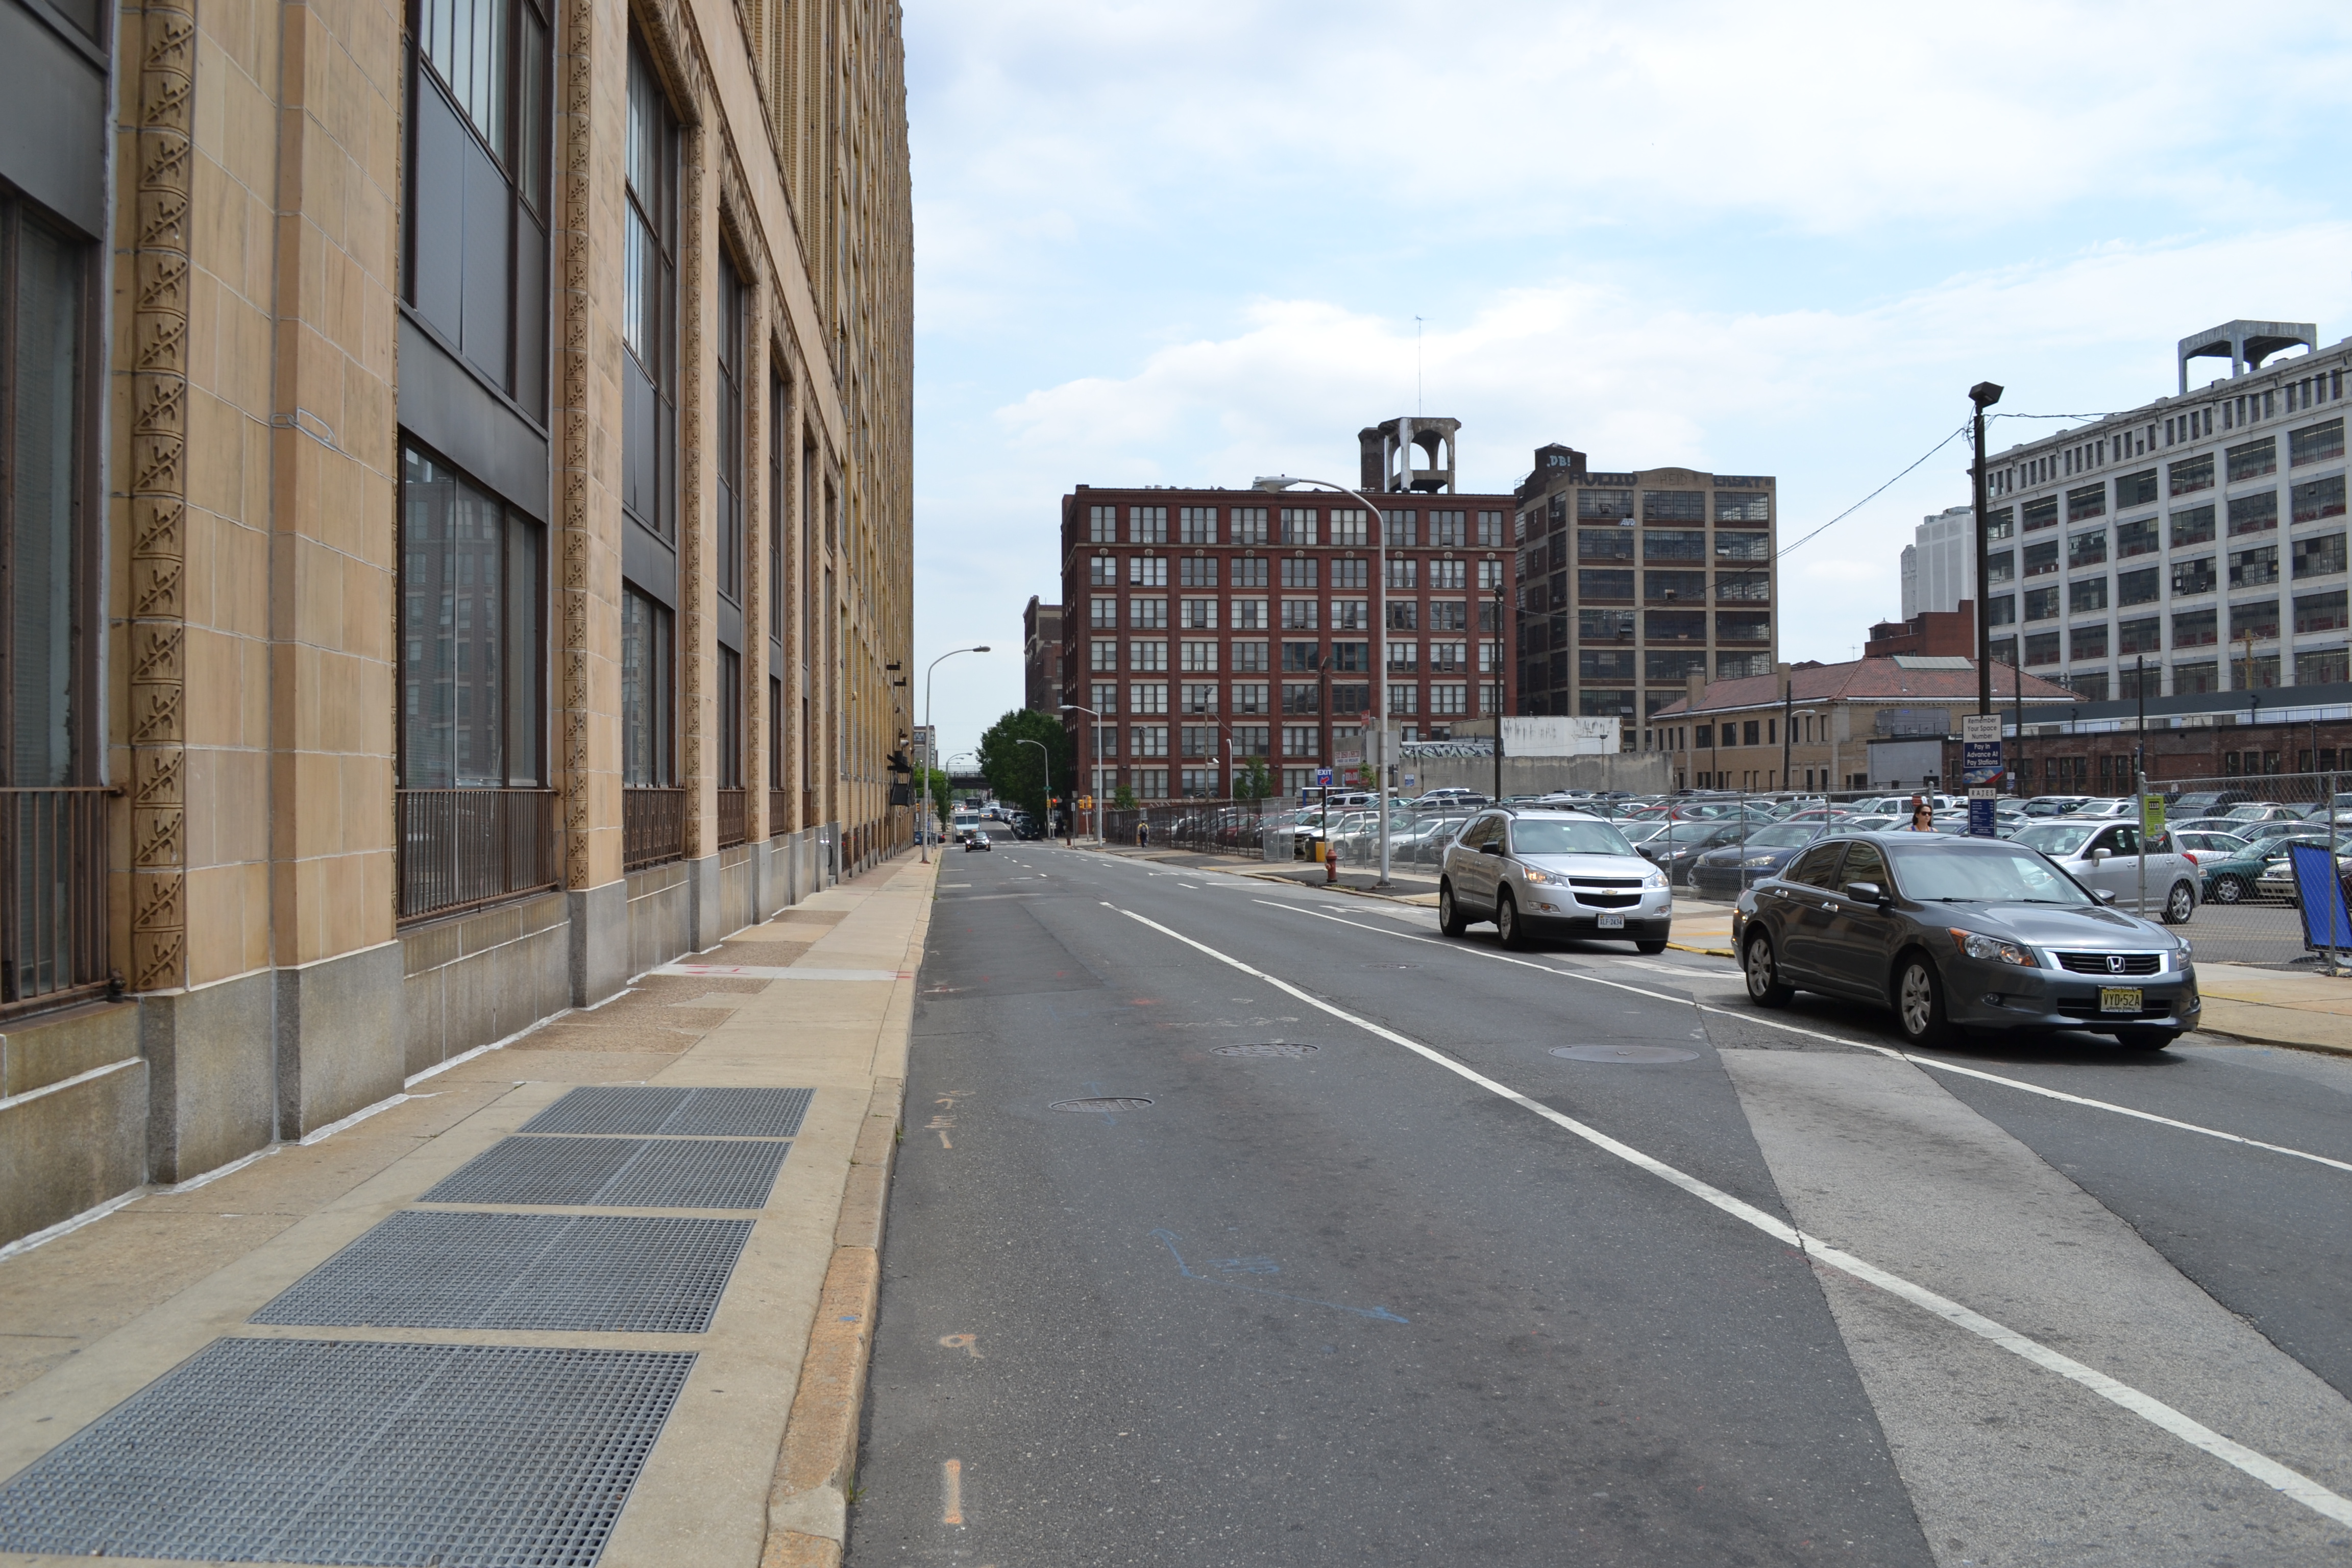 The designated right-turn lane from Callowhill Street onto Broad Street will likely be closed during construction